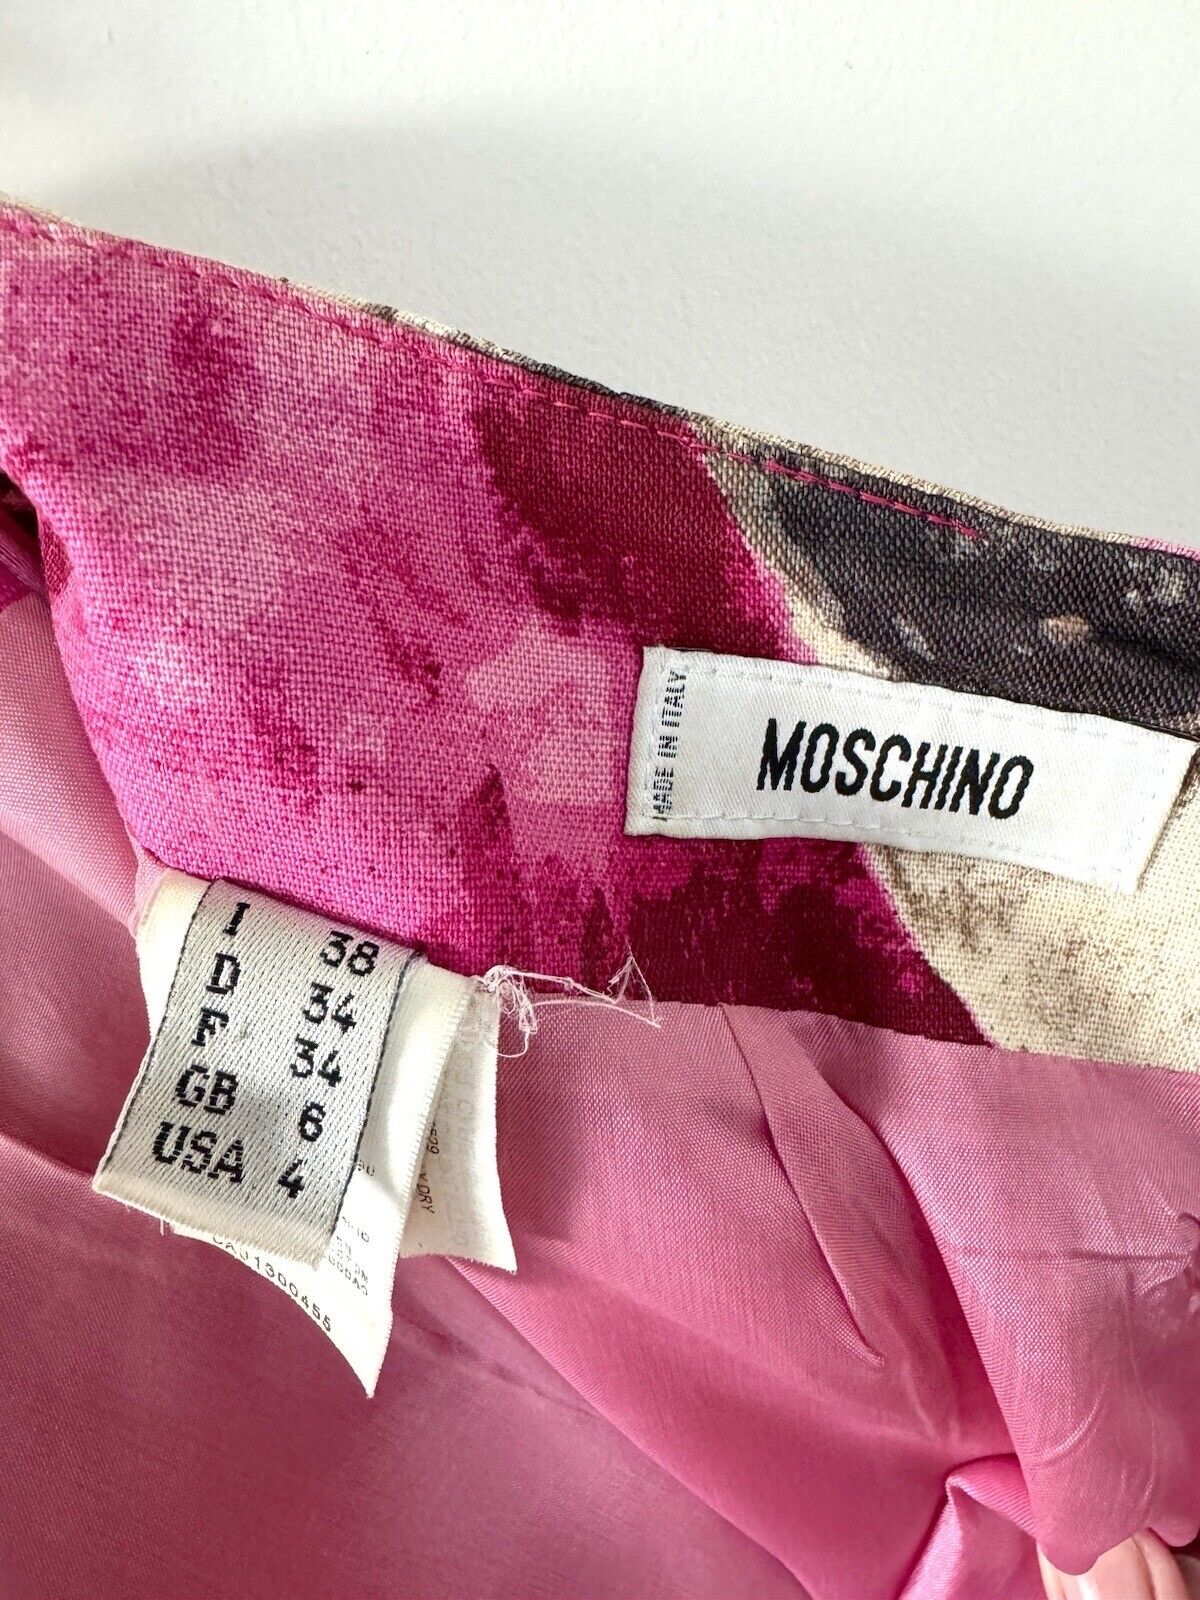 Moschino Vintage Bright Pink Early 2000s Skirt 38… - image 6